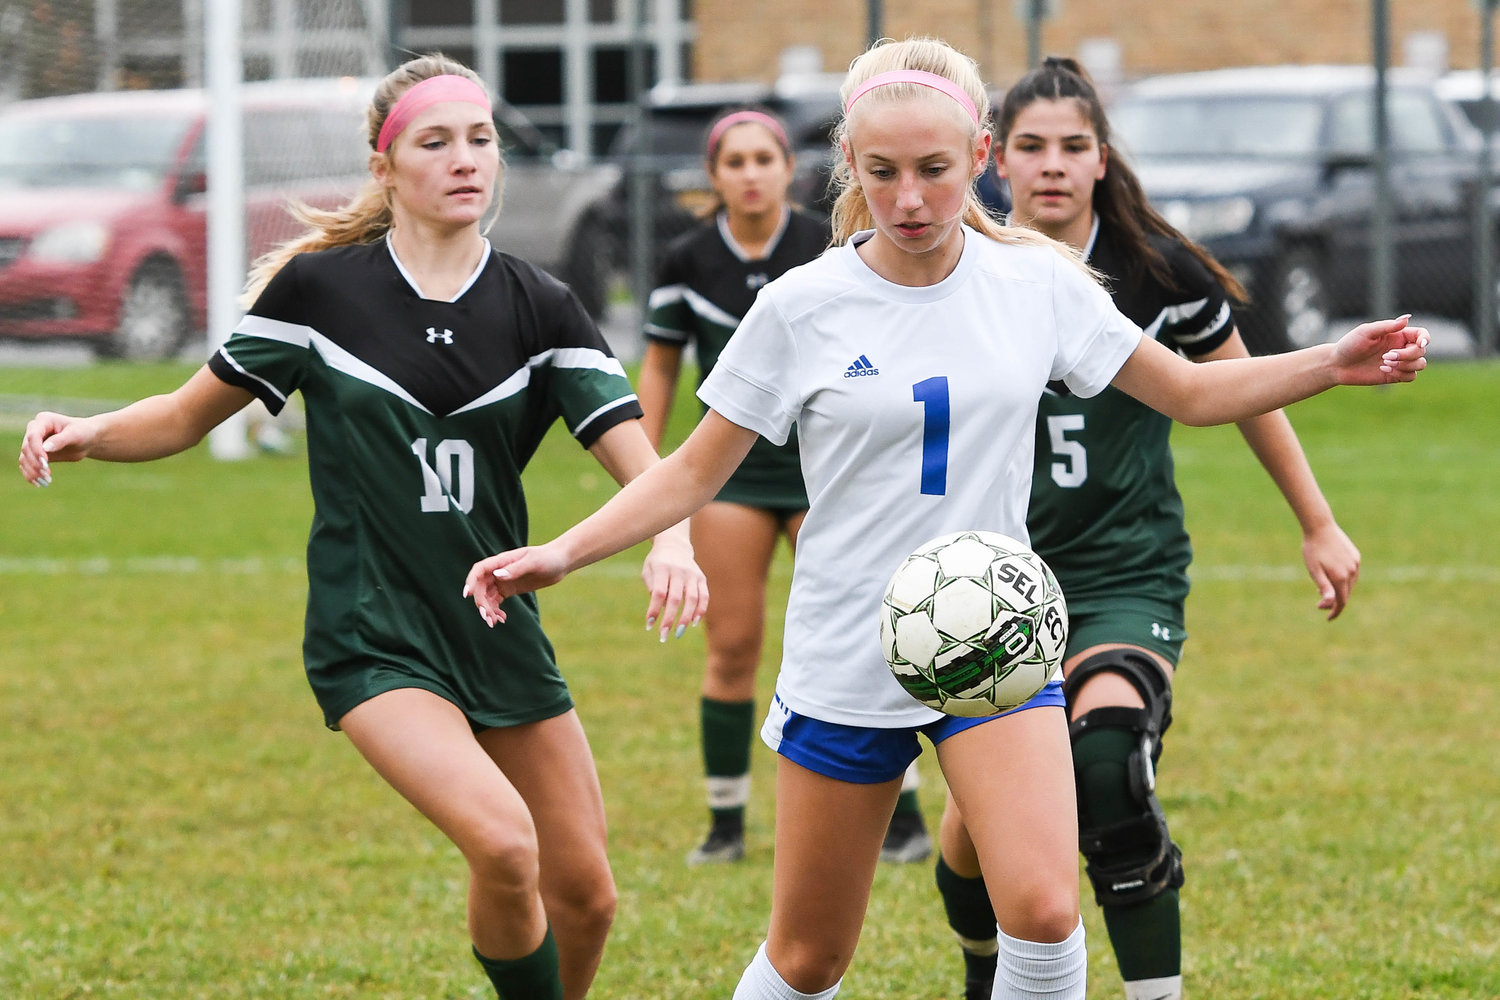 Dolgeville's Emily Metz settles the ball as Westmoreland players Victoria Downs (10) and Madalynne Enos (5) close in during the game on Tuesday. Dolgeville, the 11 seed, got a 1-0 upset win over the six seed Bulldogs.